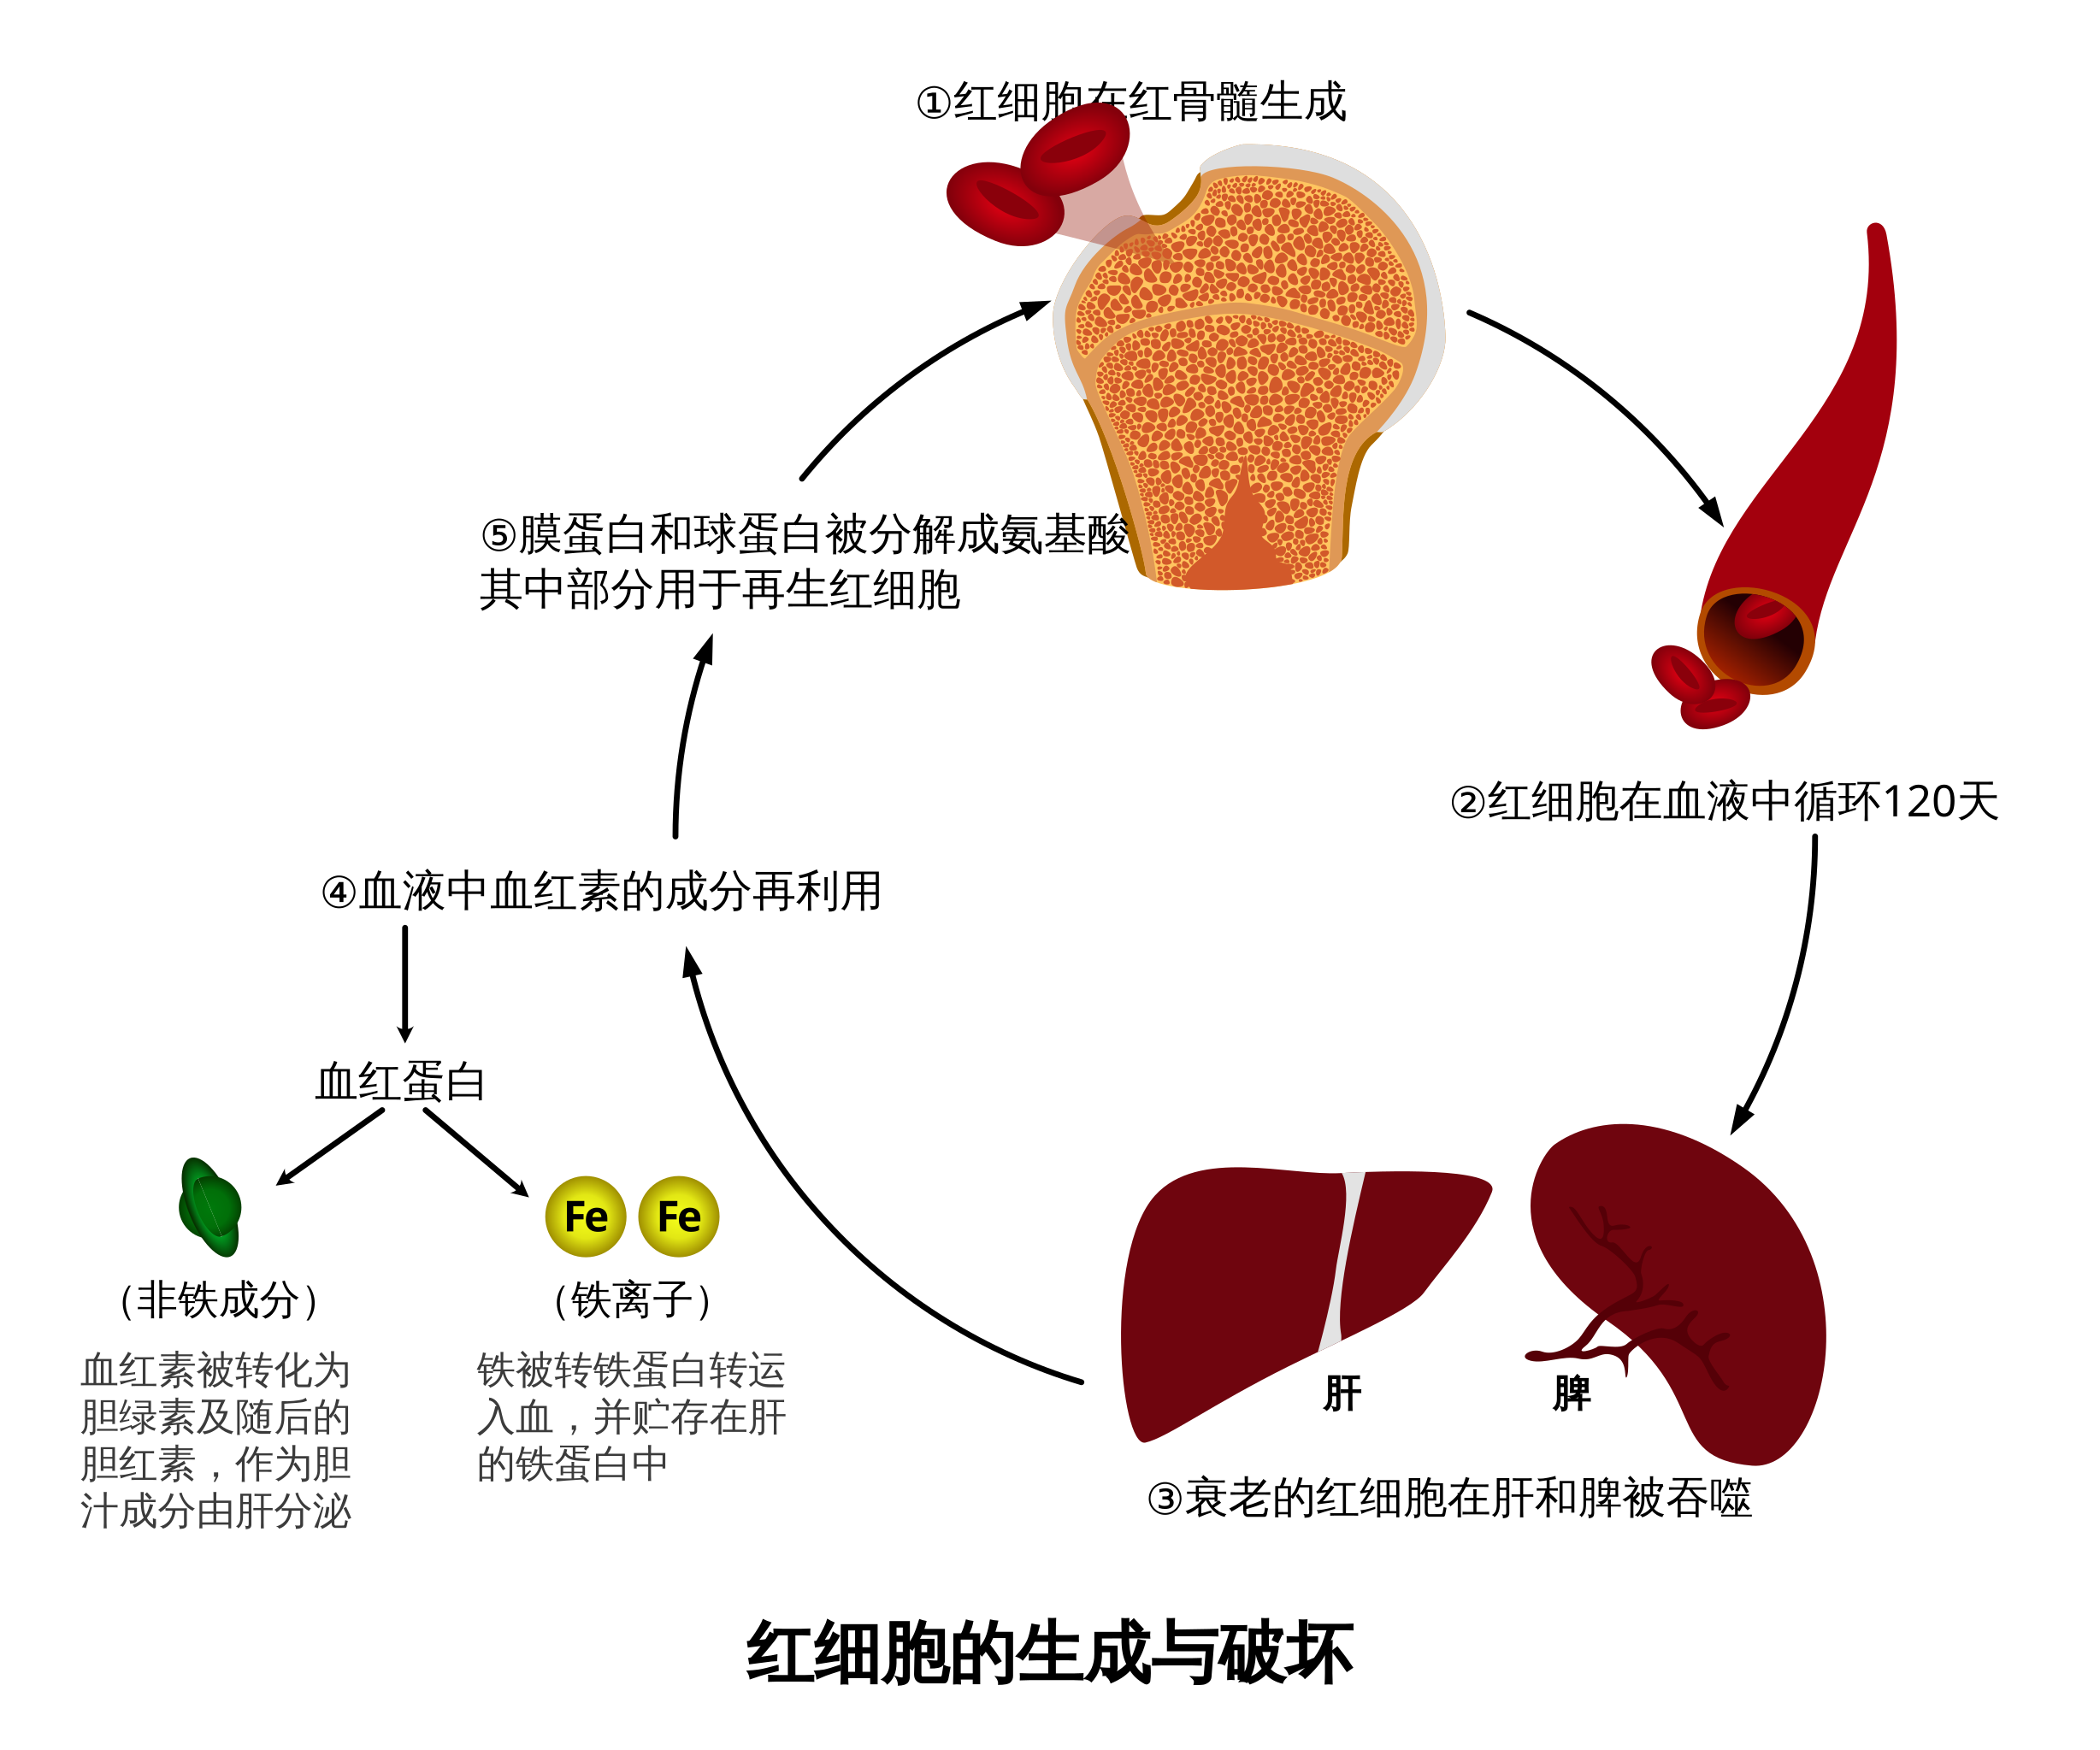 File:Brief schematic diagram of the formation and destruction process of red blood cells.svg - Wikimedia